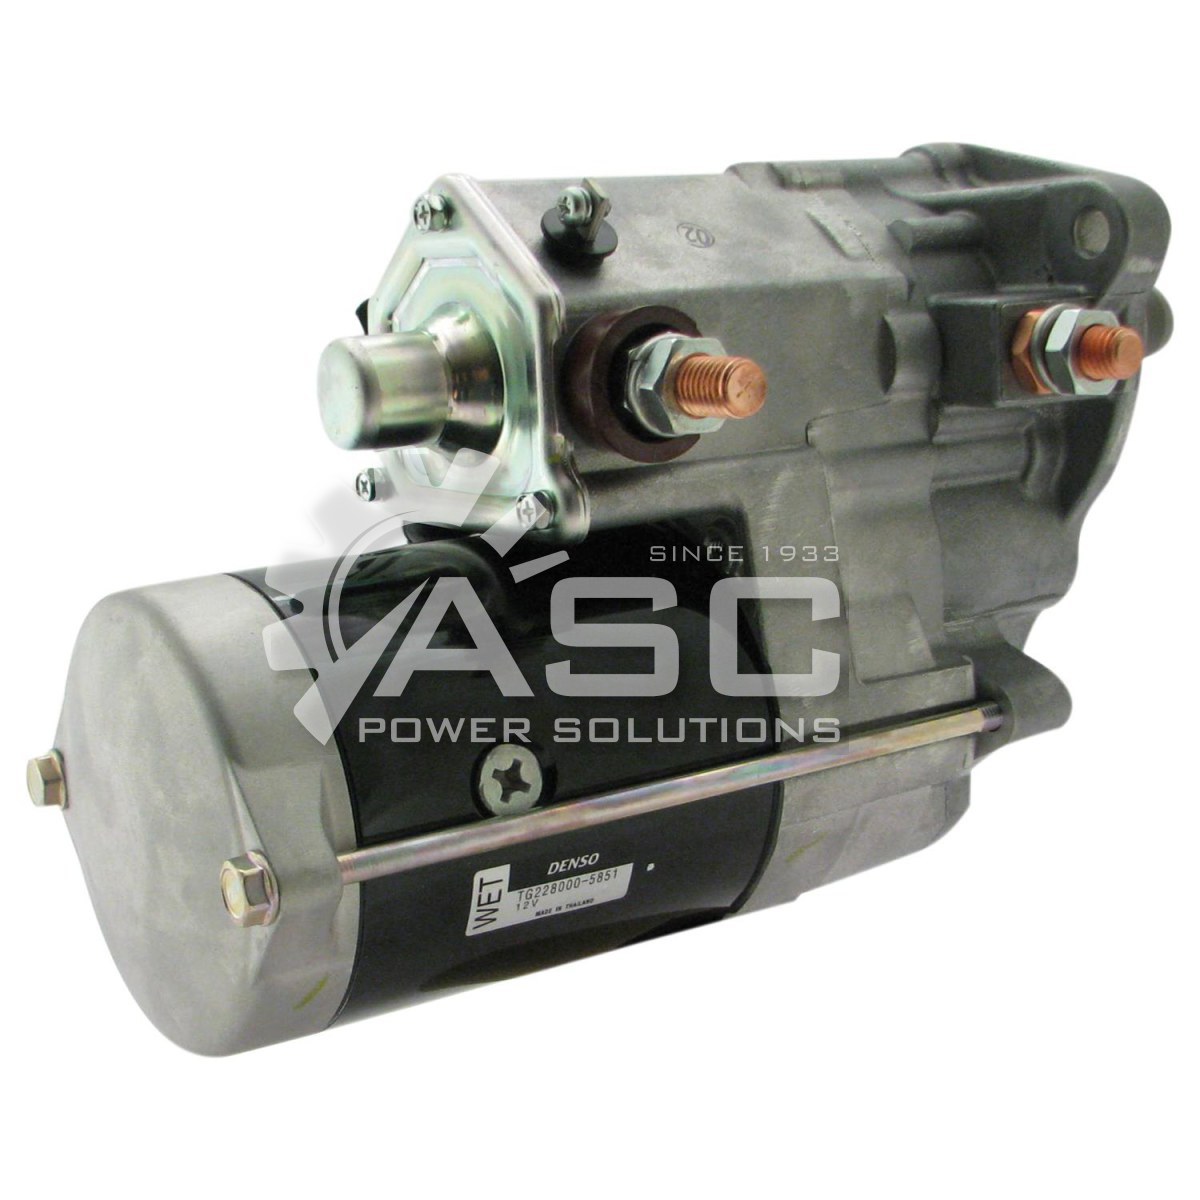 S521574_REMAN ASC POWER SOLUTIONS DENSO R STARTER MOTOR FOR CATERPILLAR AND BLUE BIRD 12V 10 TOOTH CLOCKWISE ROTATION OFF SET GEAR REDUCTION (OSGR)